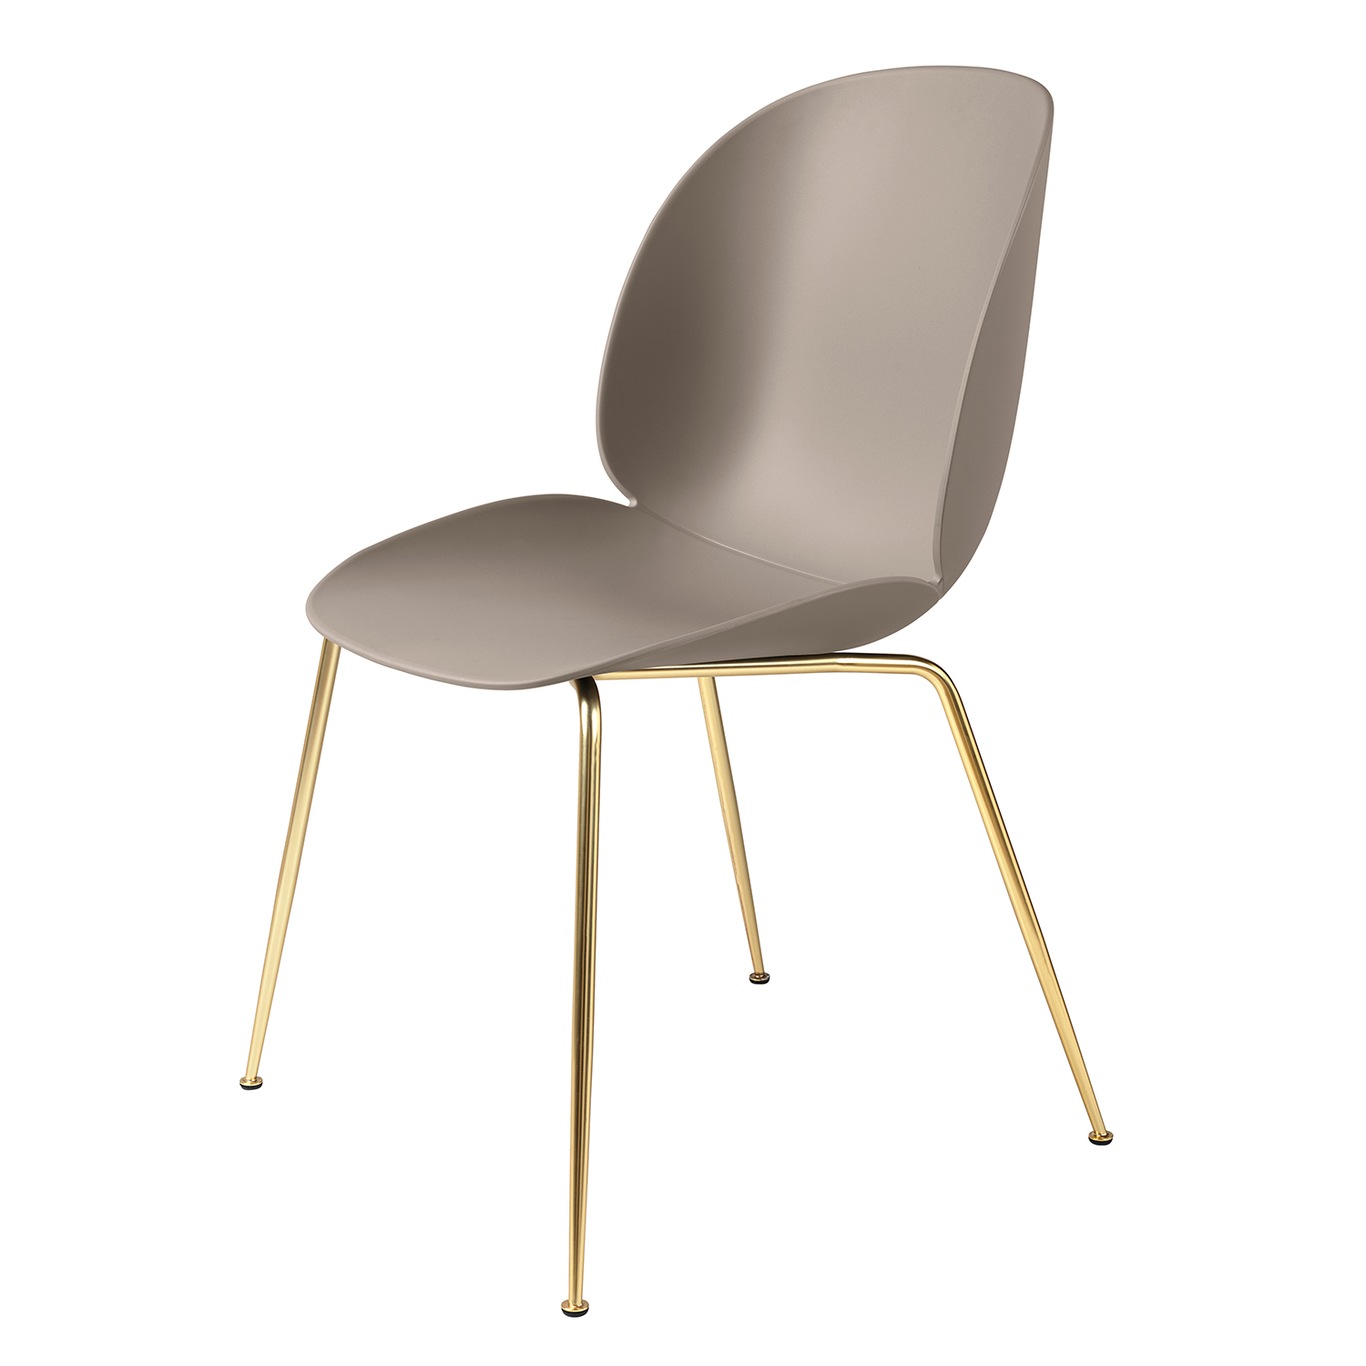 Beetle Dining Chair Un-upholstered, Conic Base Brass, New Beige